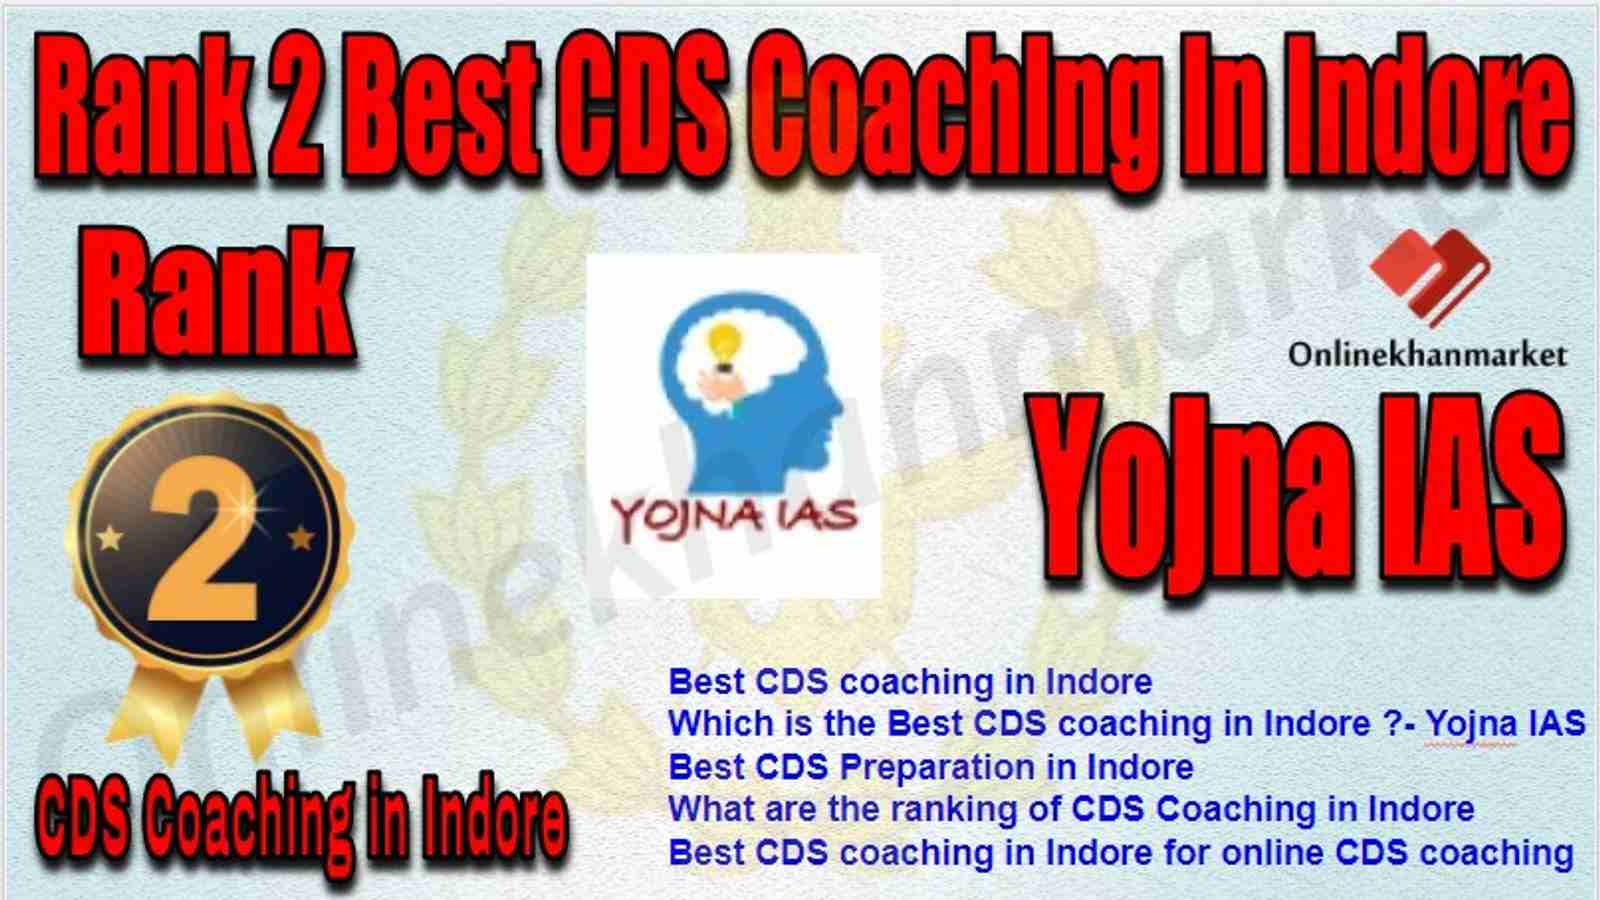 Rank 2 Best CDS Coaching in indore